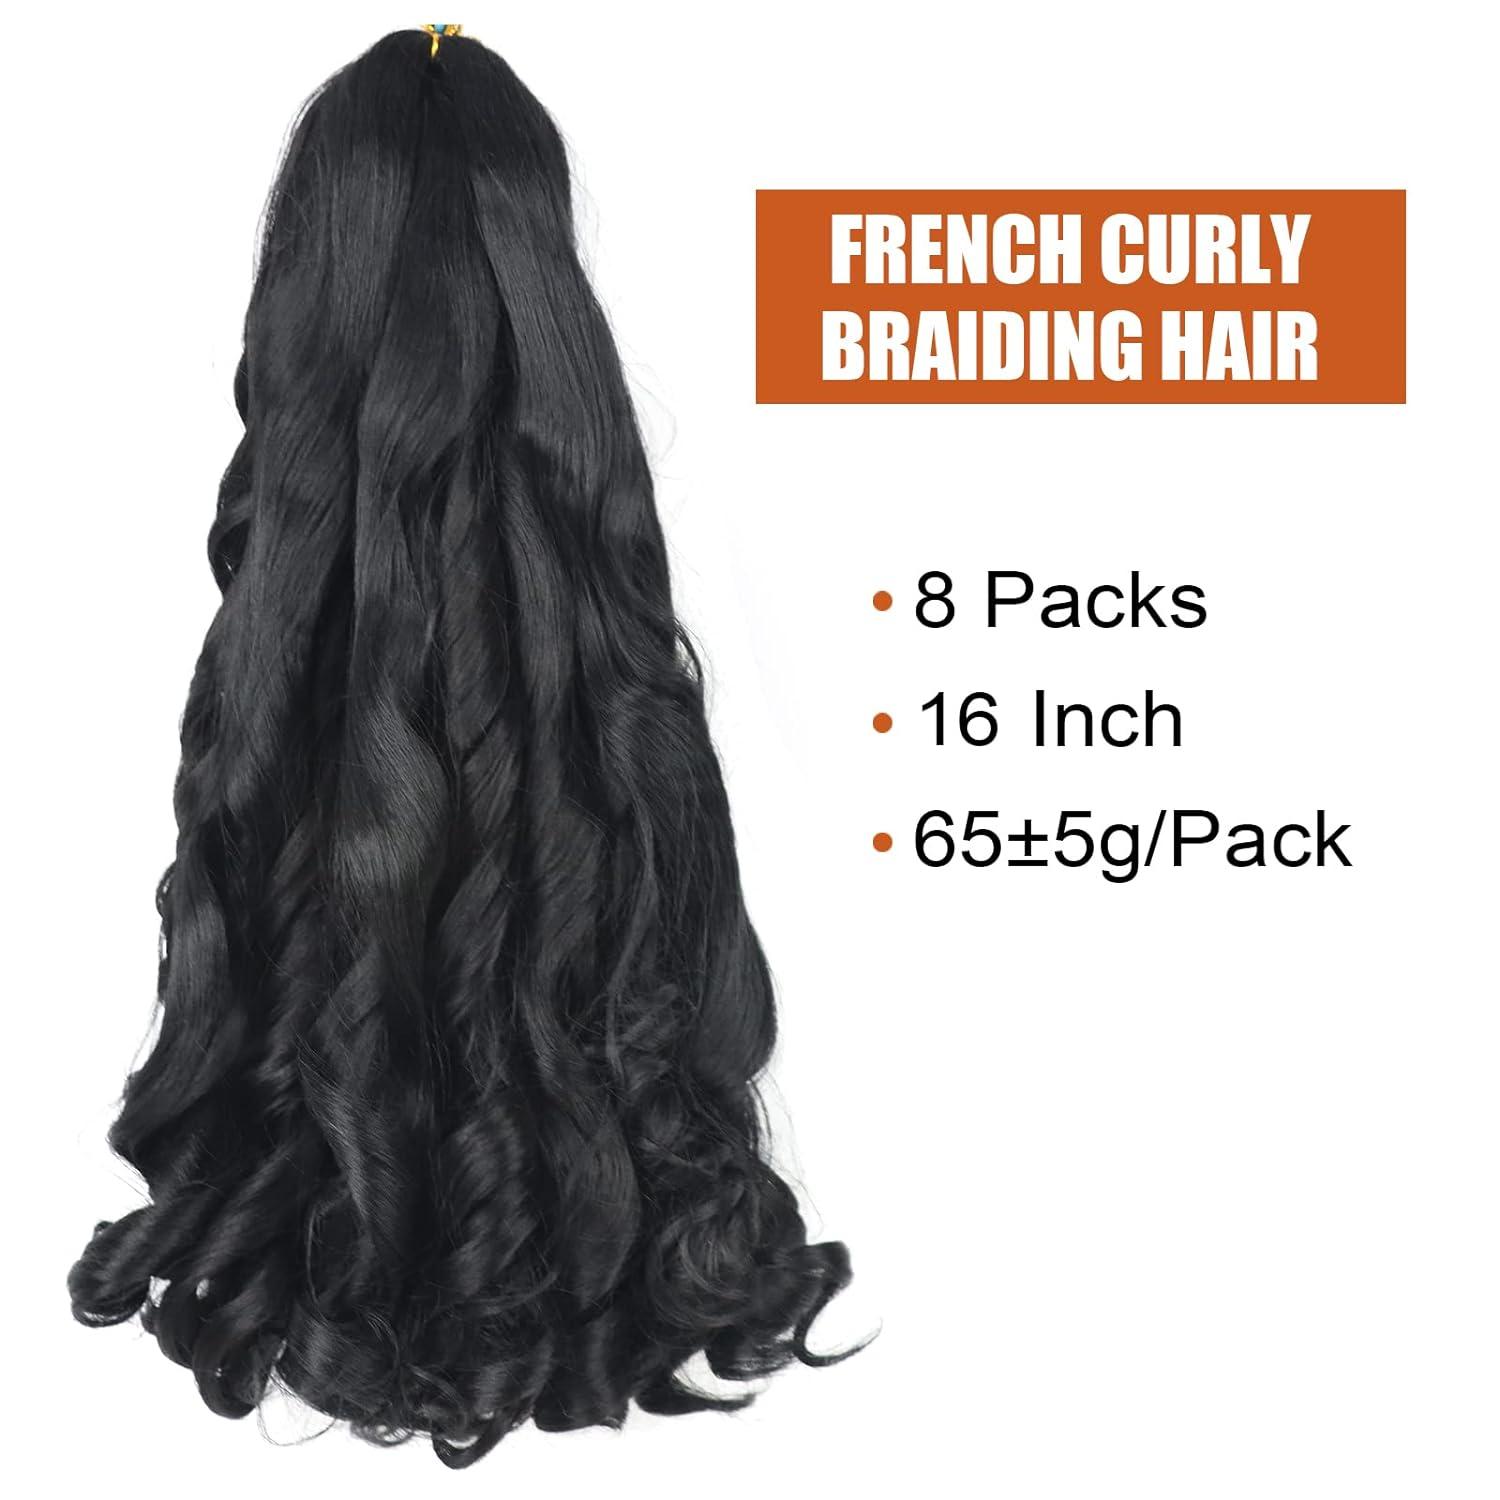 French Curly Braiding Hair 16 Inch 8 Packs Curly Braiding Hair Pre  Stretched for Box Braids French Curls Braiding Hair French Curl Crochet  Braids Bouncy Loose Wavy Spiral Curl Braiding Hair French